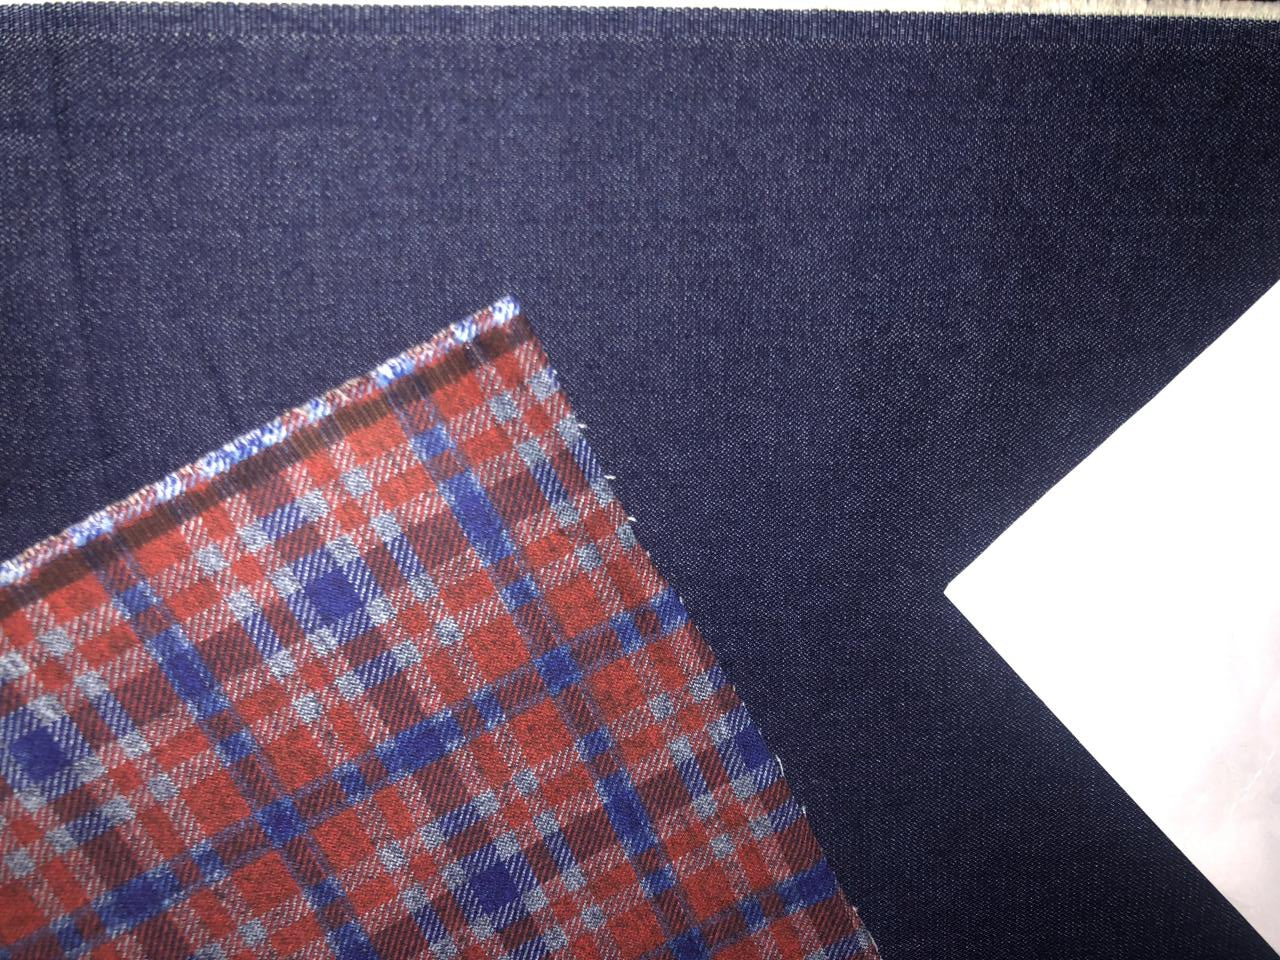 100% Cotton Denim Fabric 58" wide REVERSABLE available in 2 colors red and blue plaids with a solid denim blue reverse AND a blue purple plaid with a solid blue reverse with a